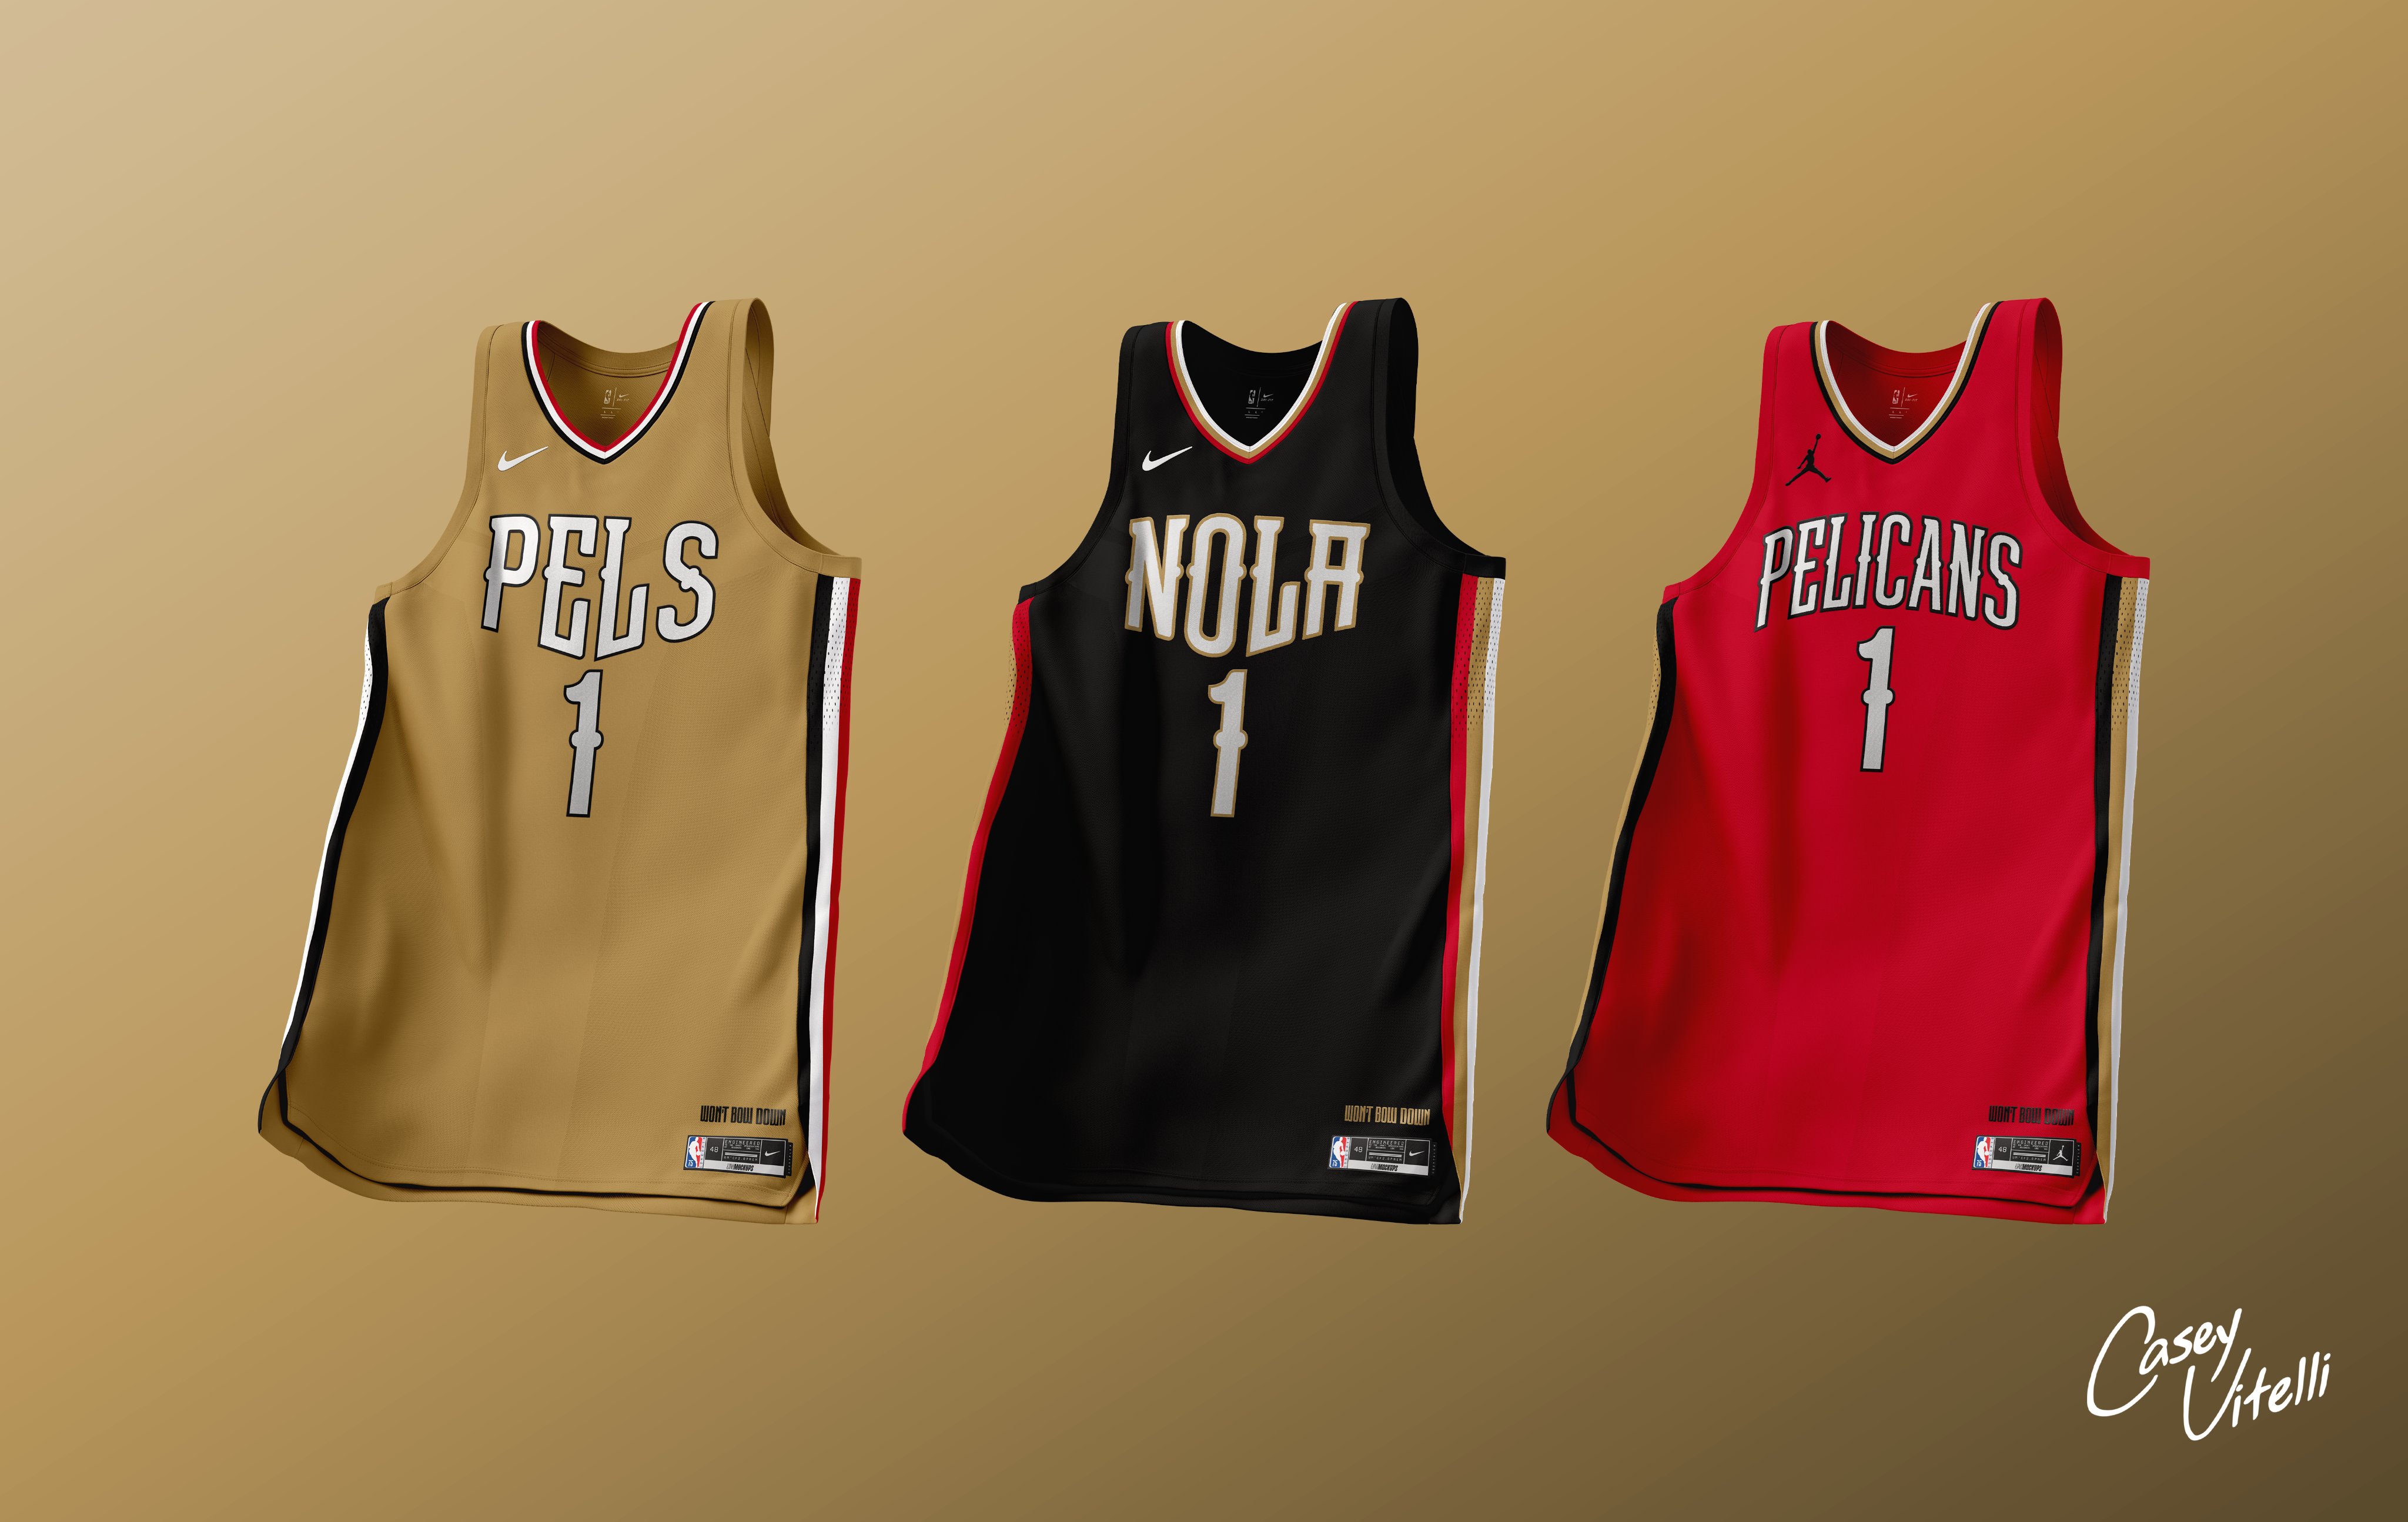 Casey Vitelli on X: NEW ORLEANS PELICANS - CONCEPT (FINAL PART) I went  through the comments and pulled out some things that I thought were  interesting over a black/gold/red set. What are